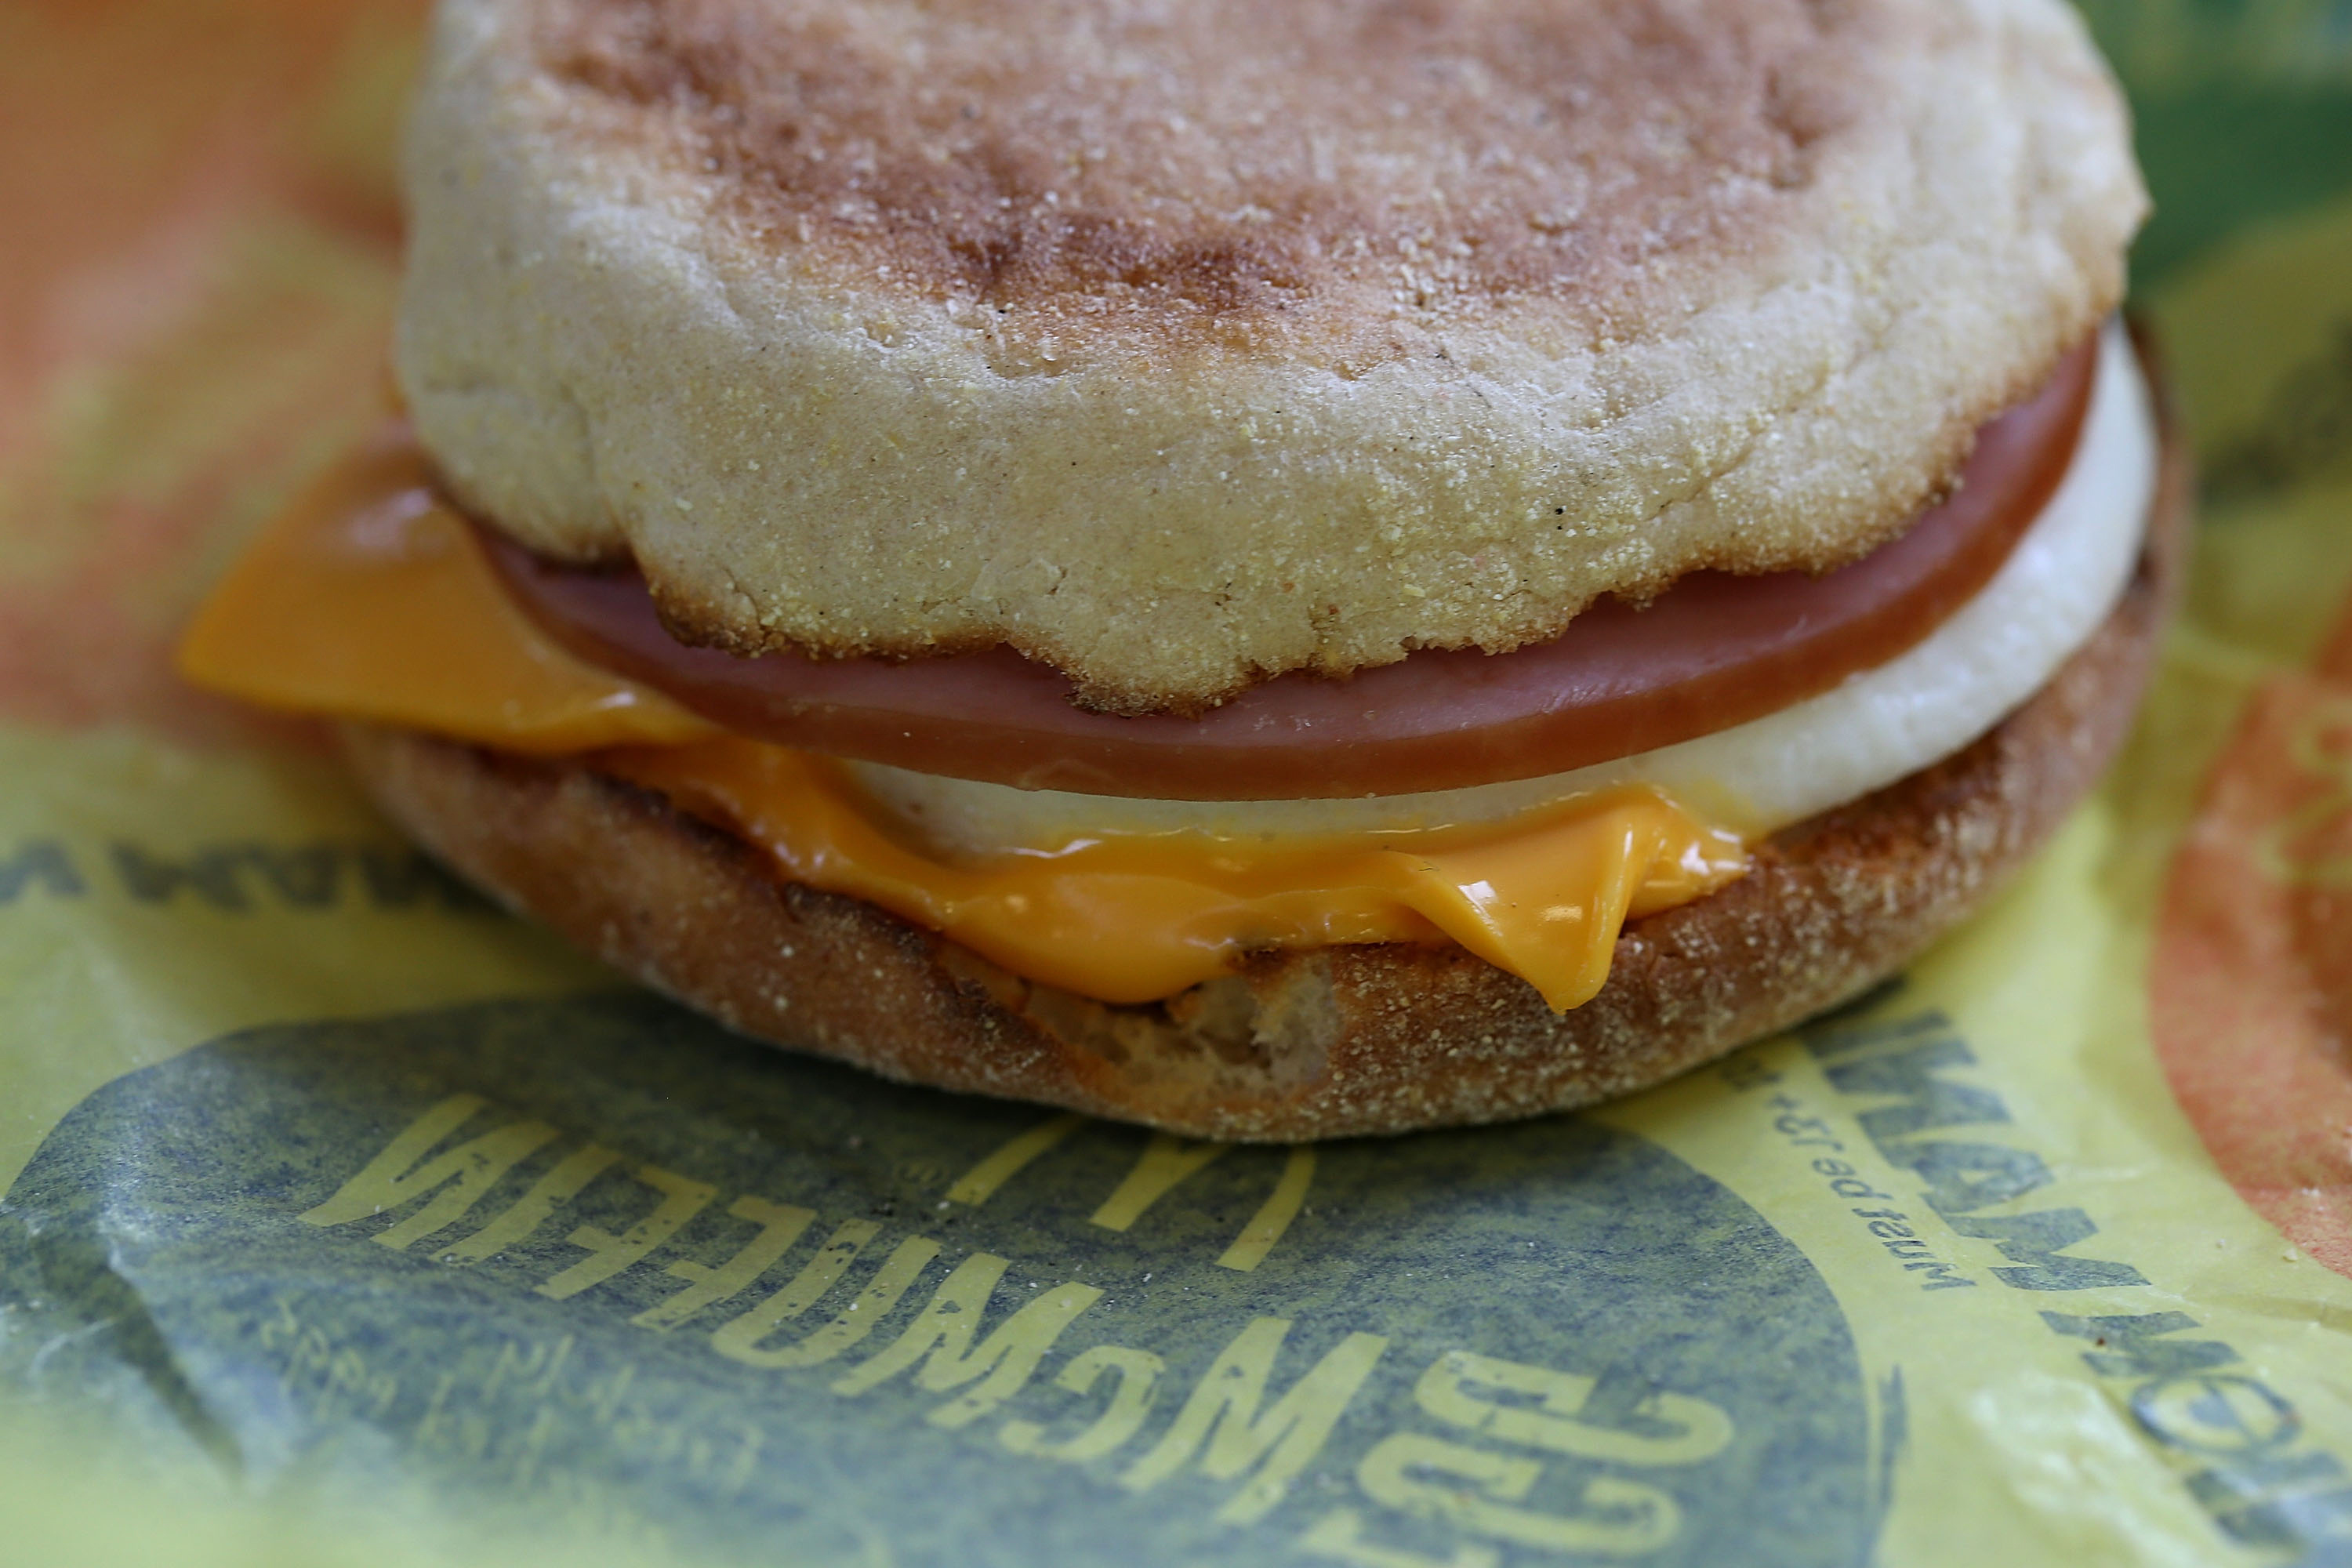 A McDonald's Egg McMuffin is displayed at a McDonald's restaurant on July 23, 2015 in Fairfield (Justin Sullivan / Getty Images)